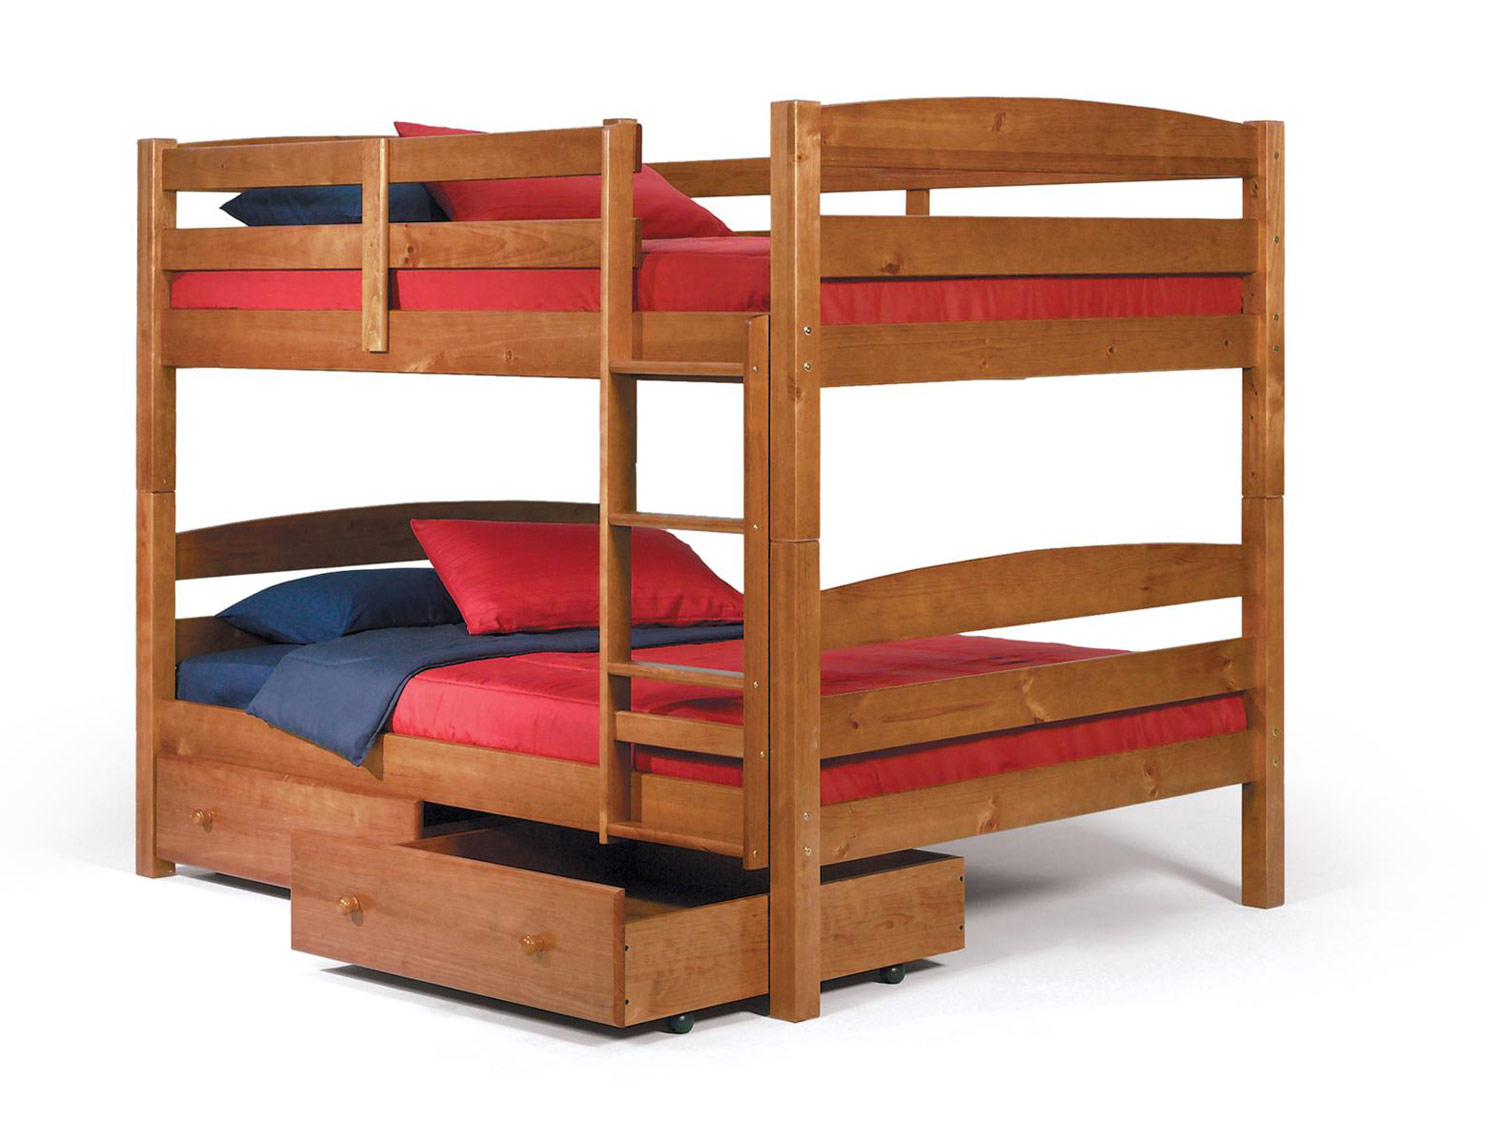 Chelsea Home 3641540-S Full Over Full Bunk Bed with Underbed Storage - Honey